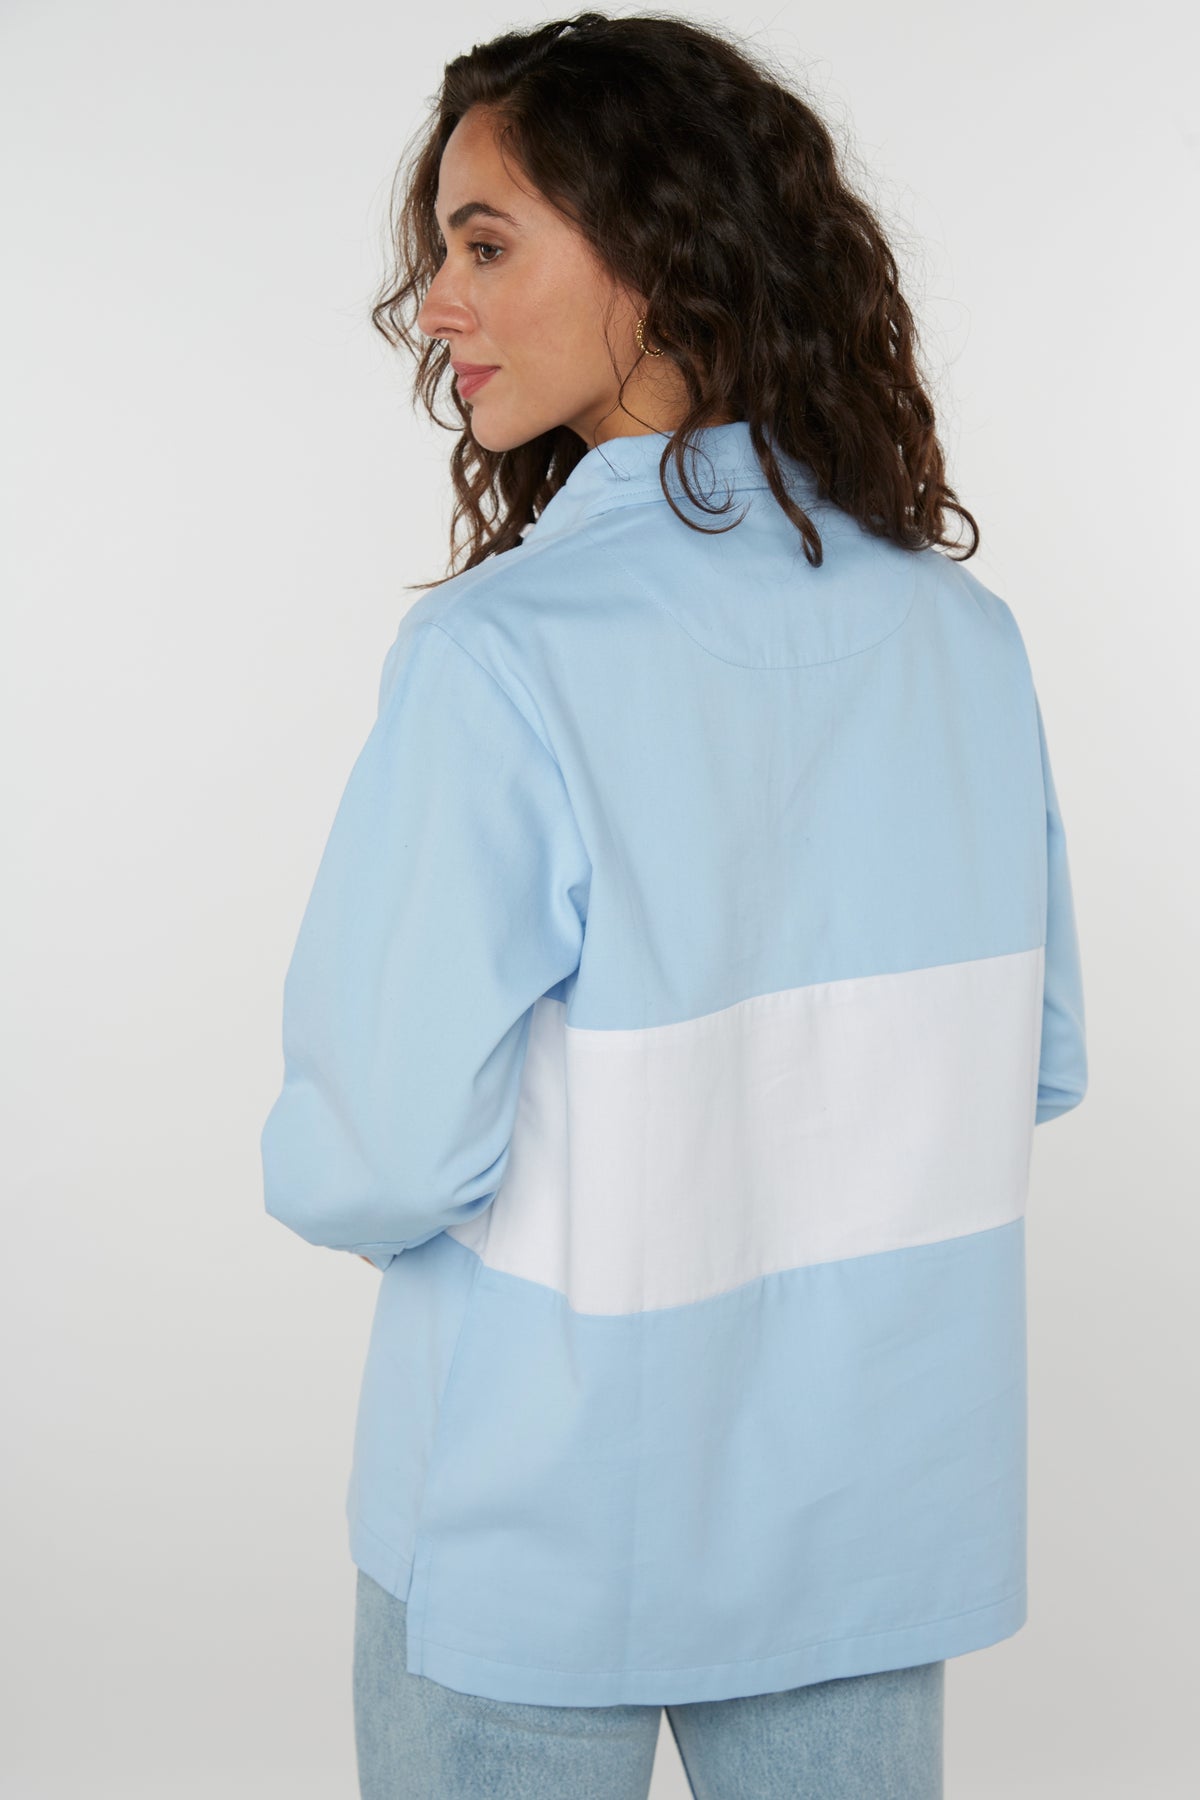 Padstow Unisex Deck Shirt - Blue - Whale Of A Time Clothing